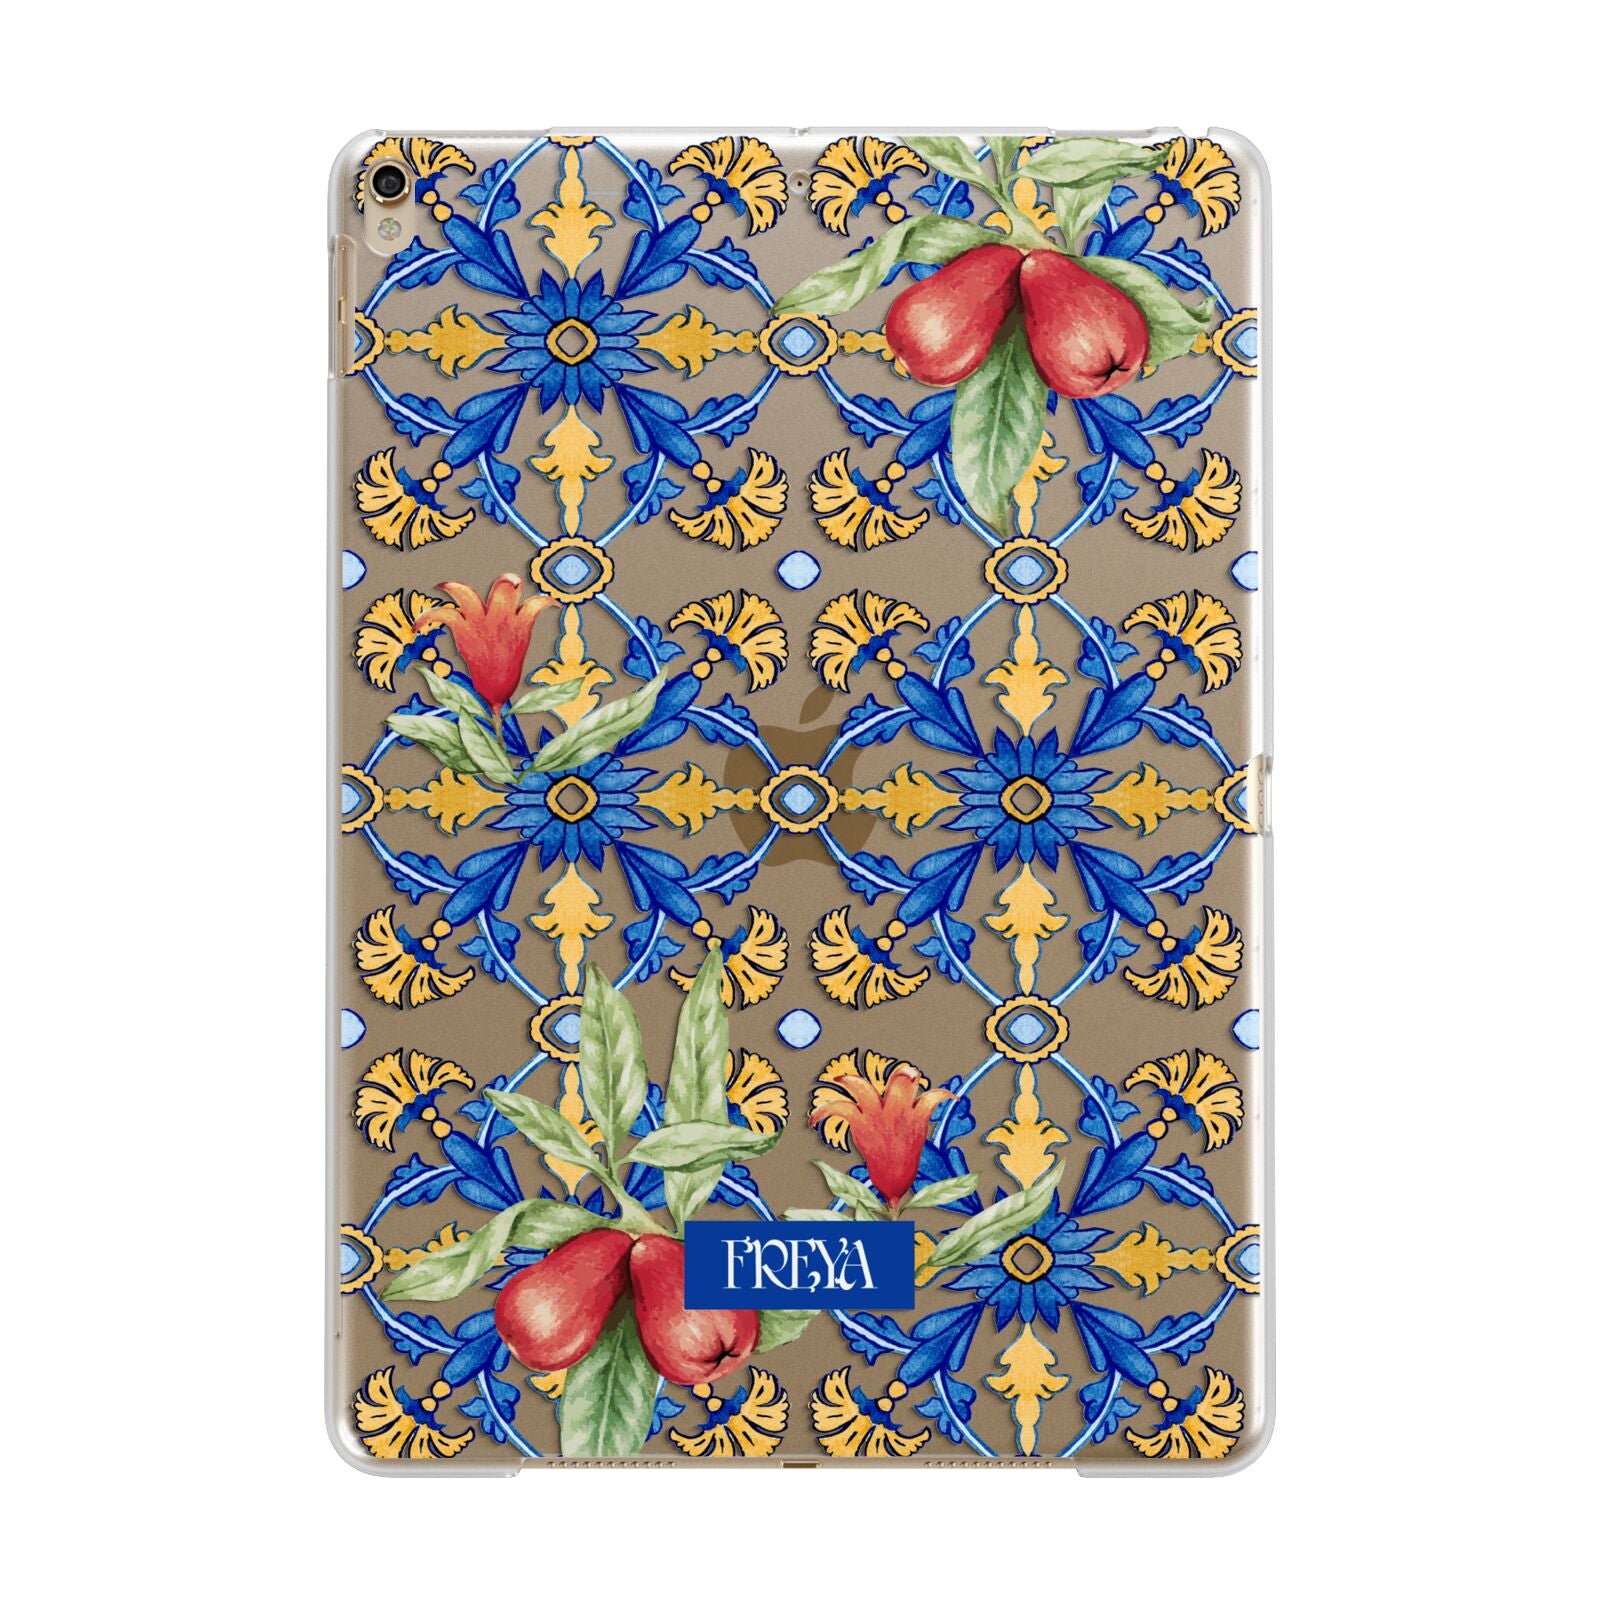 Personalised Mediterranean Fruit and Tiles Apple iPad Gold Case